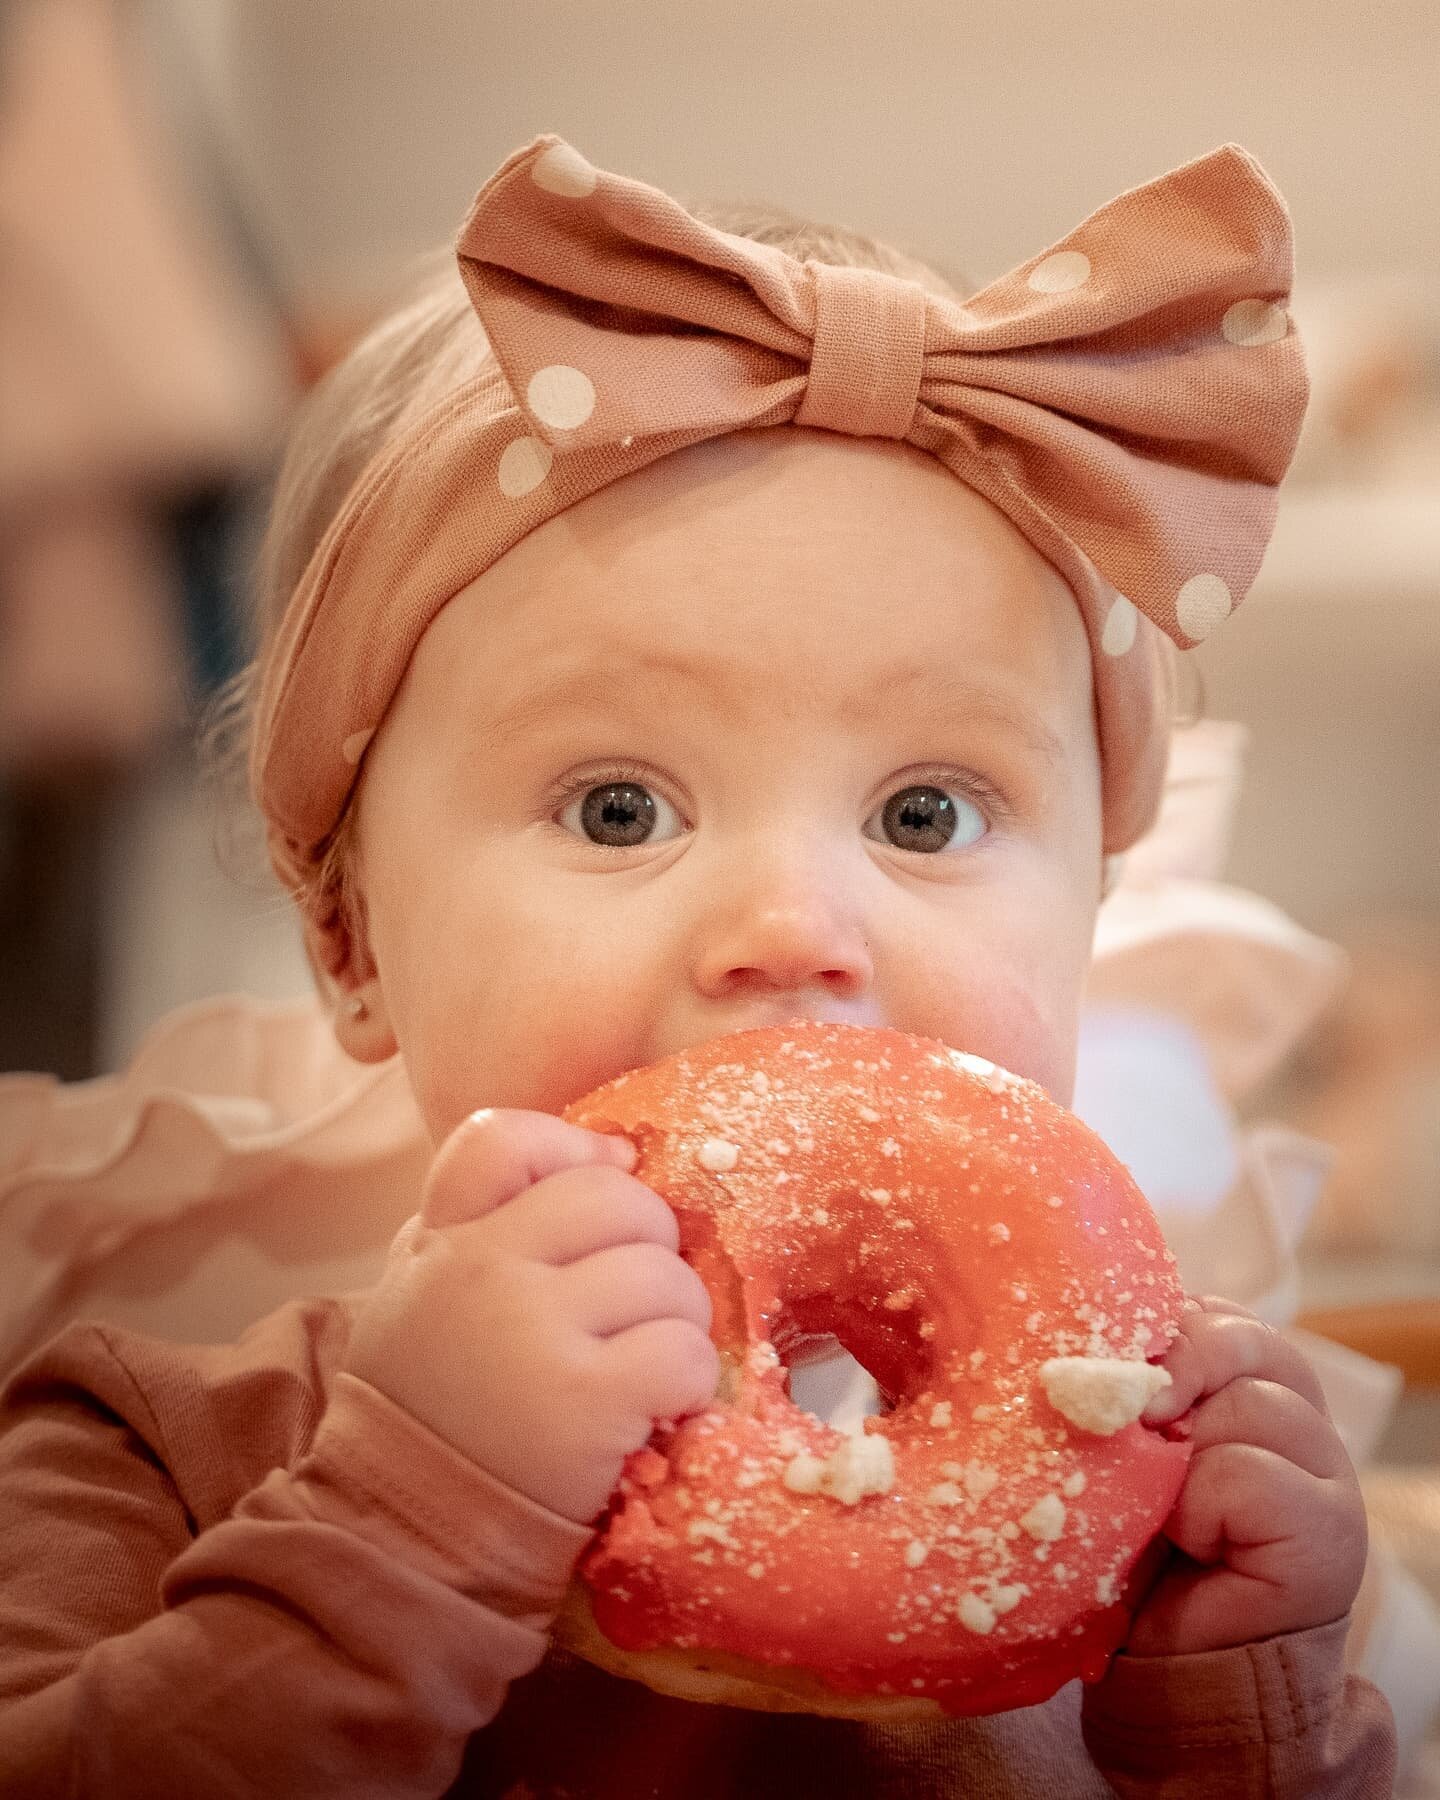 A series: G enjoying a donut thats  basically the size of her head 😊

#familyphotography #portraitphotography #photography #birthdayphotoshoot #hamilton #gta #birthday #hamiltonphotographer #burlingtonphotographer #oakvillephotographer #sonya7iii 
#